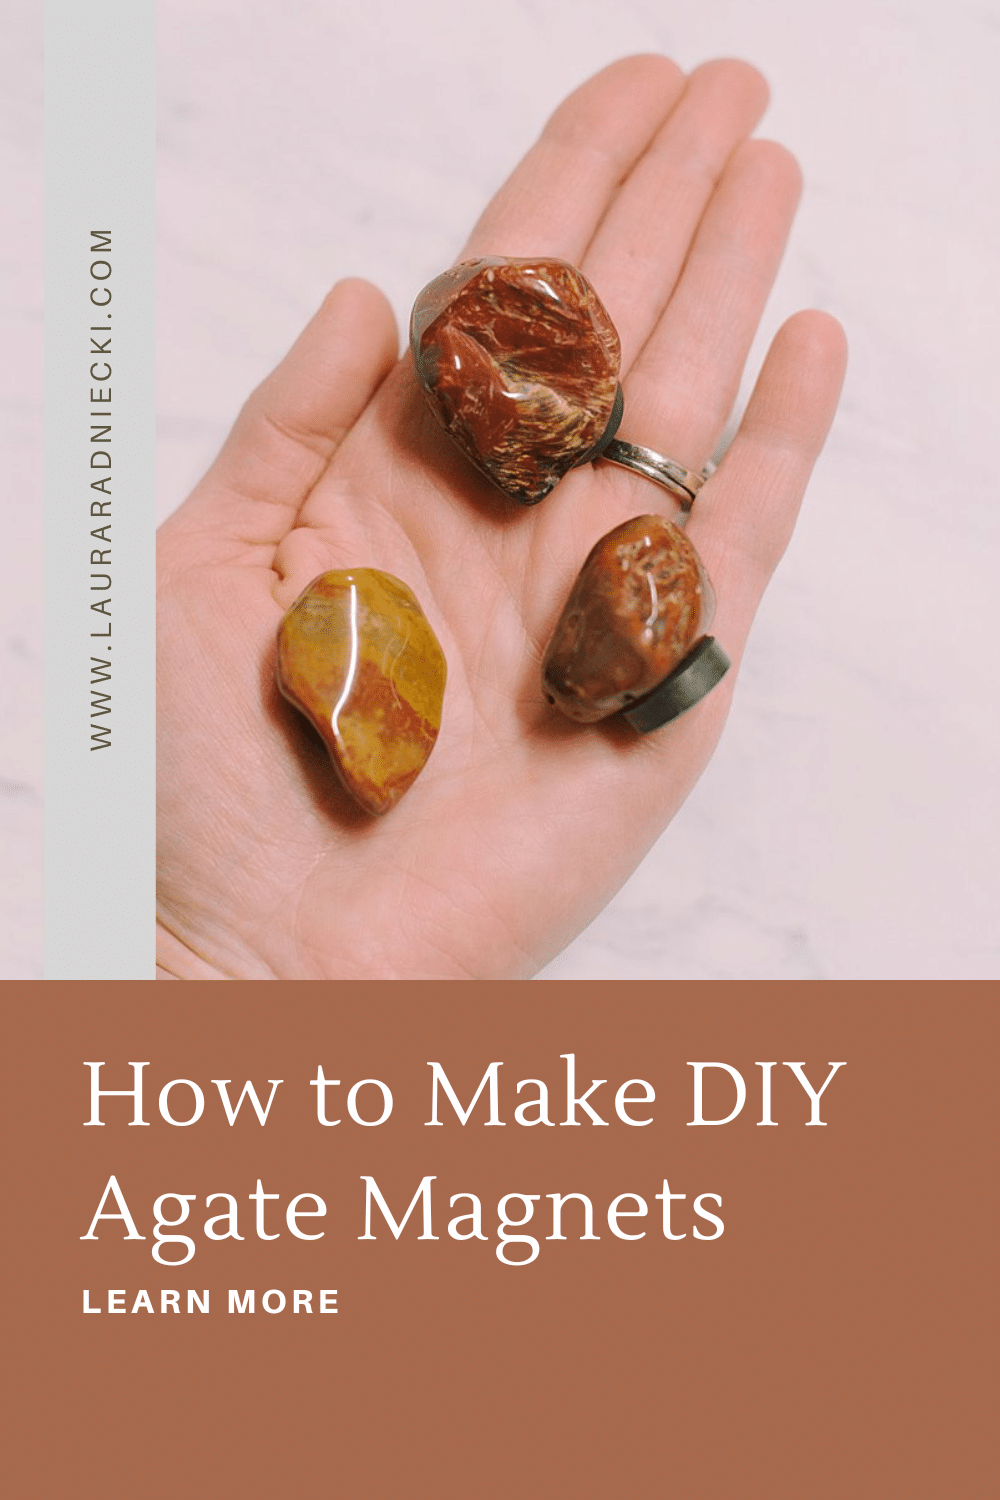 How to Make Agate Magnets | DIY Rock Magnets